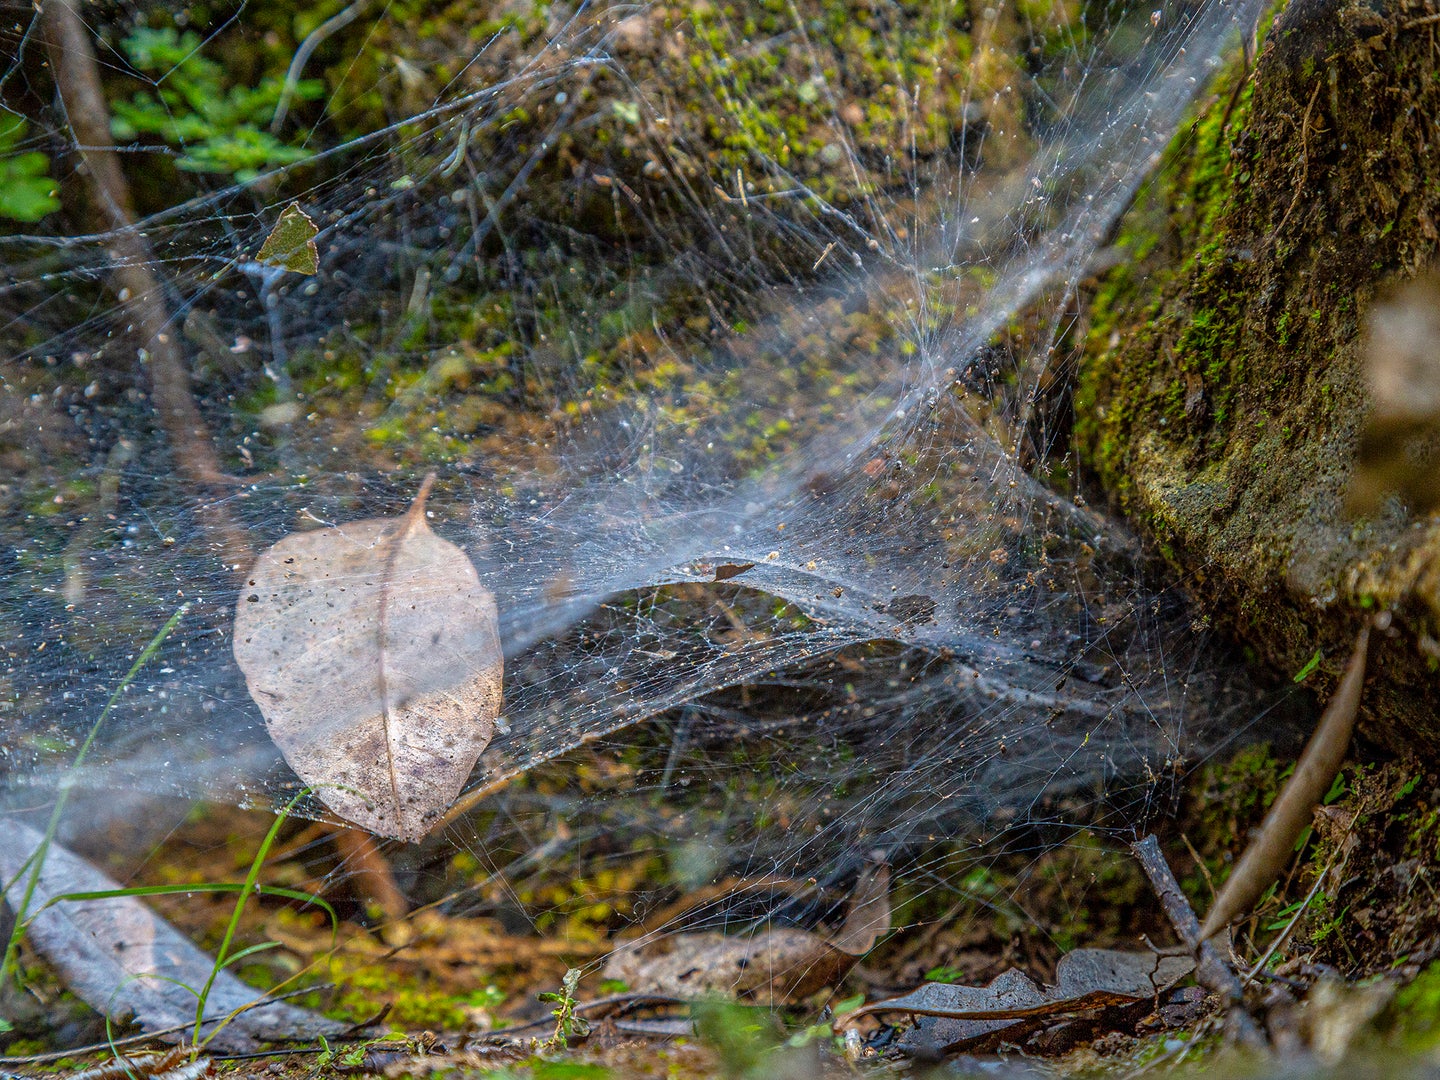 An image of a spider web to illustrate a story about a South American species of social spiders.